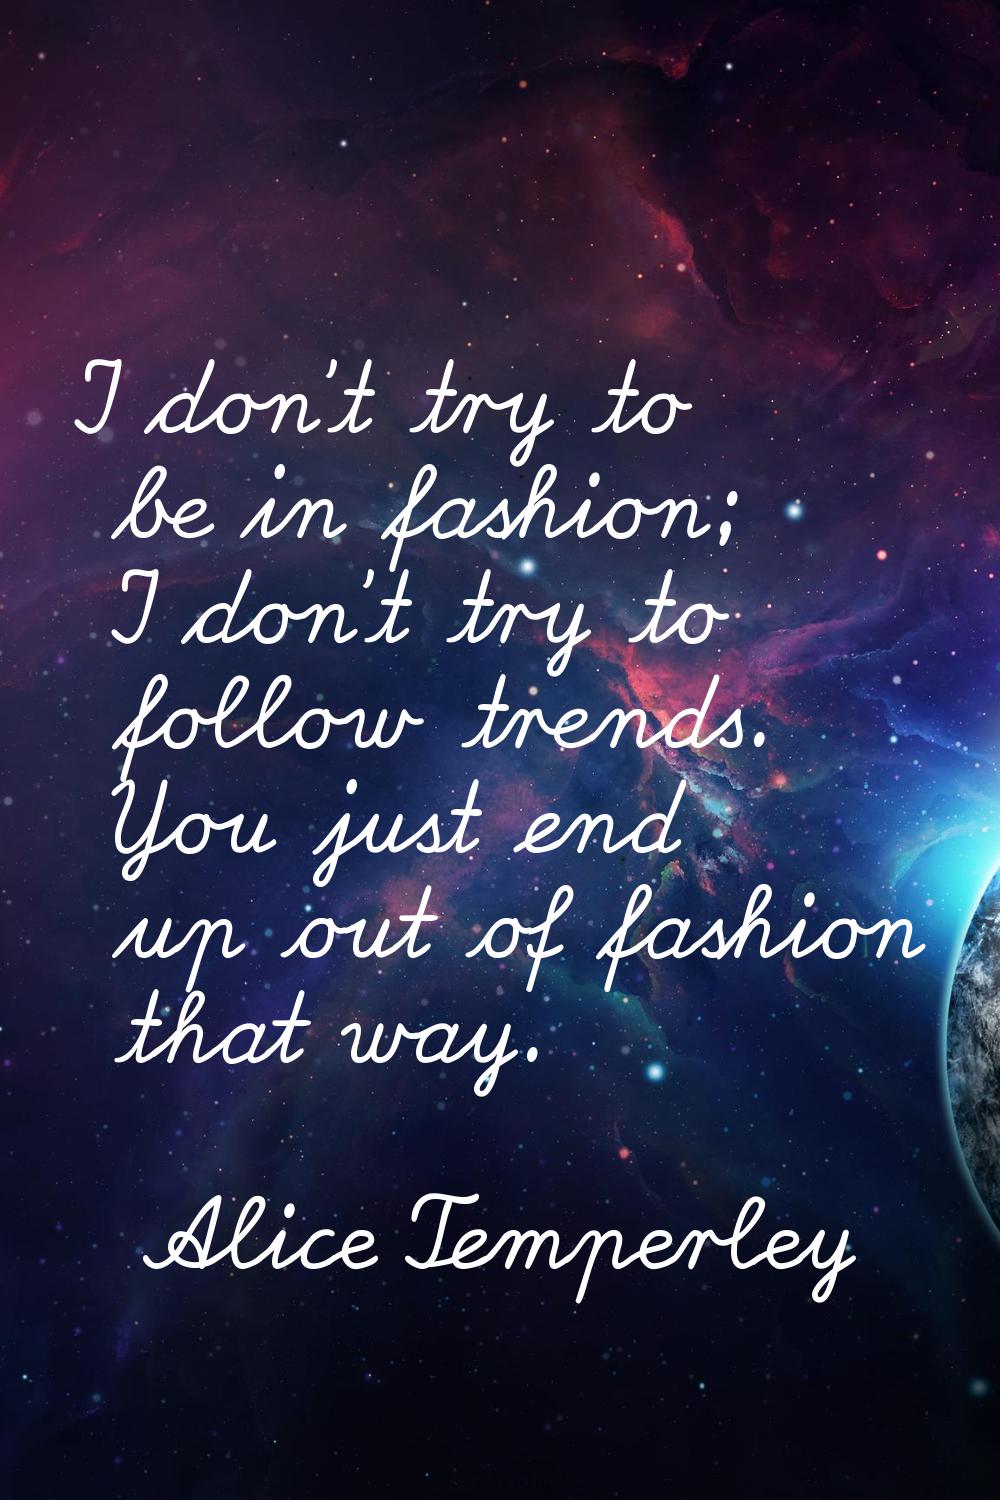 I don't try to be in fashion; I don't try to follow trends. You just end up out of fashion that way